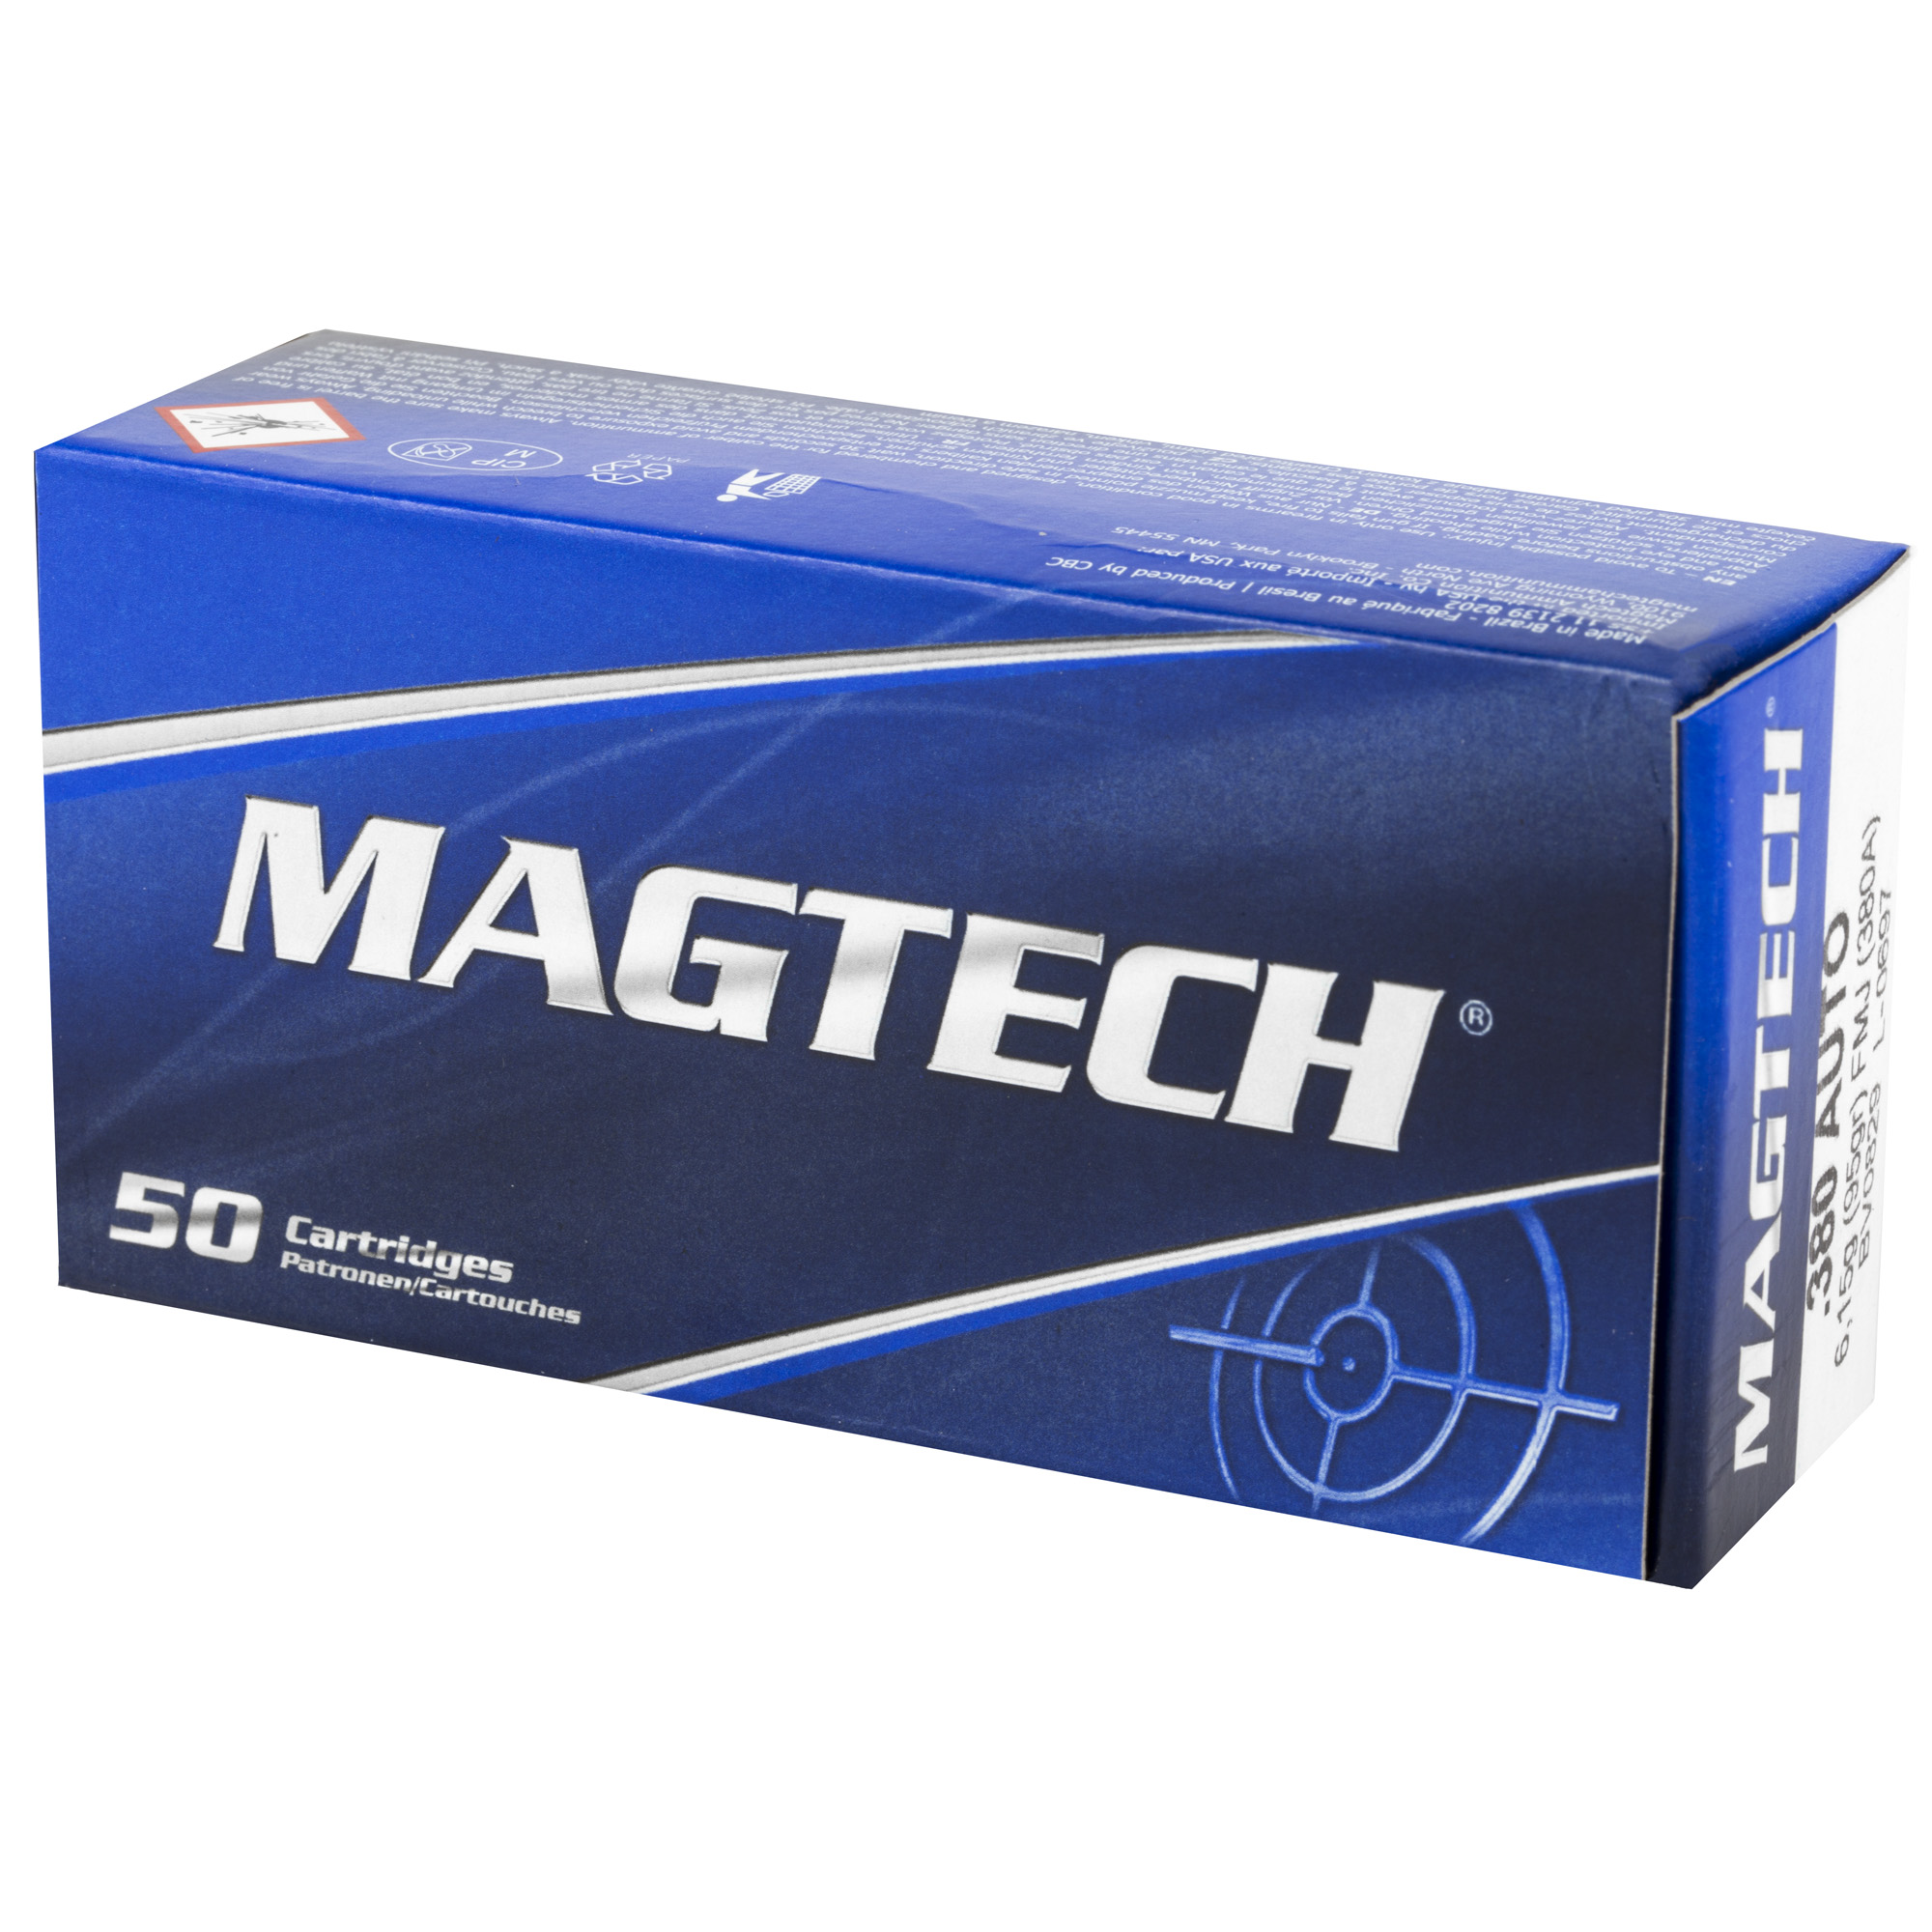 Magtech, Sport Shooting, 380 ACP, 95 Grain FMJ, Round Nose, Full Metal Case, 50 Round Box,  Case Pack 20-Boxes (1000Rds.), 380A,